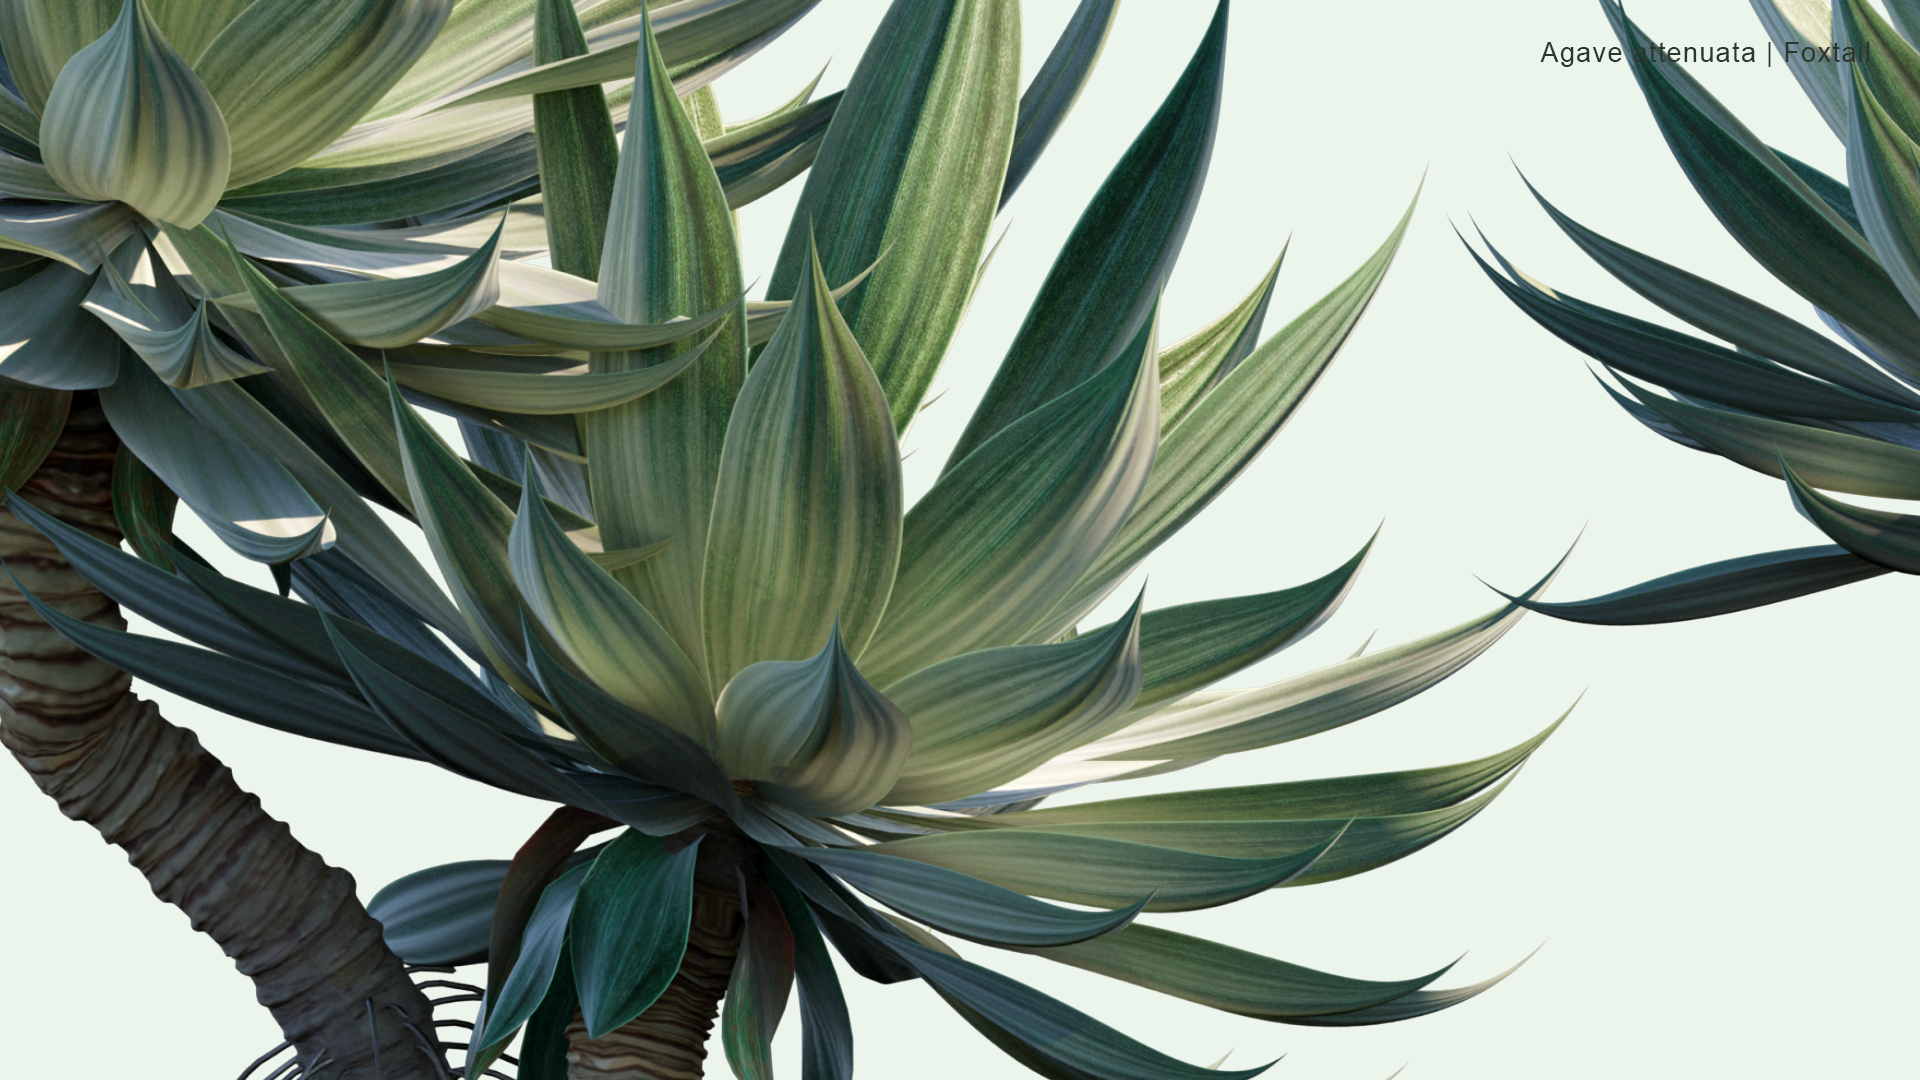 2D Agave Attenuata - Foxtail